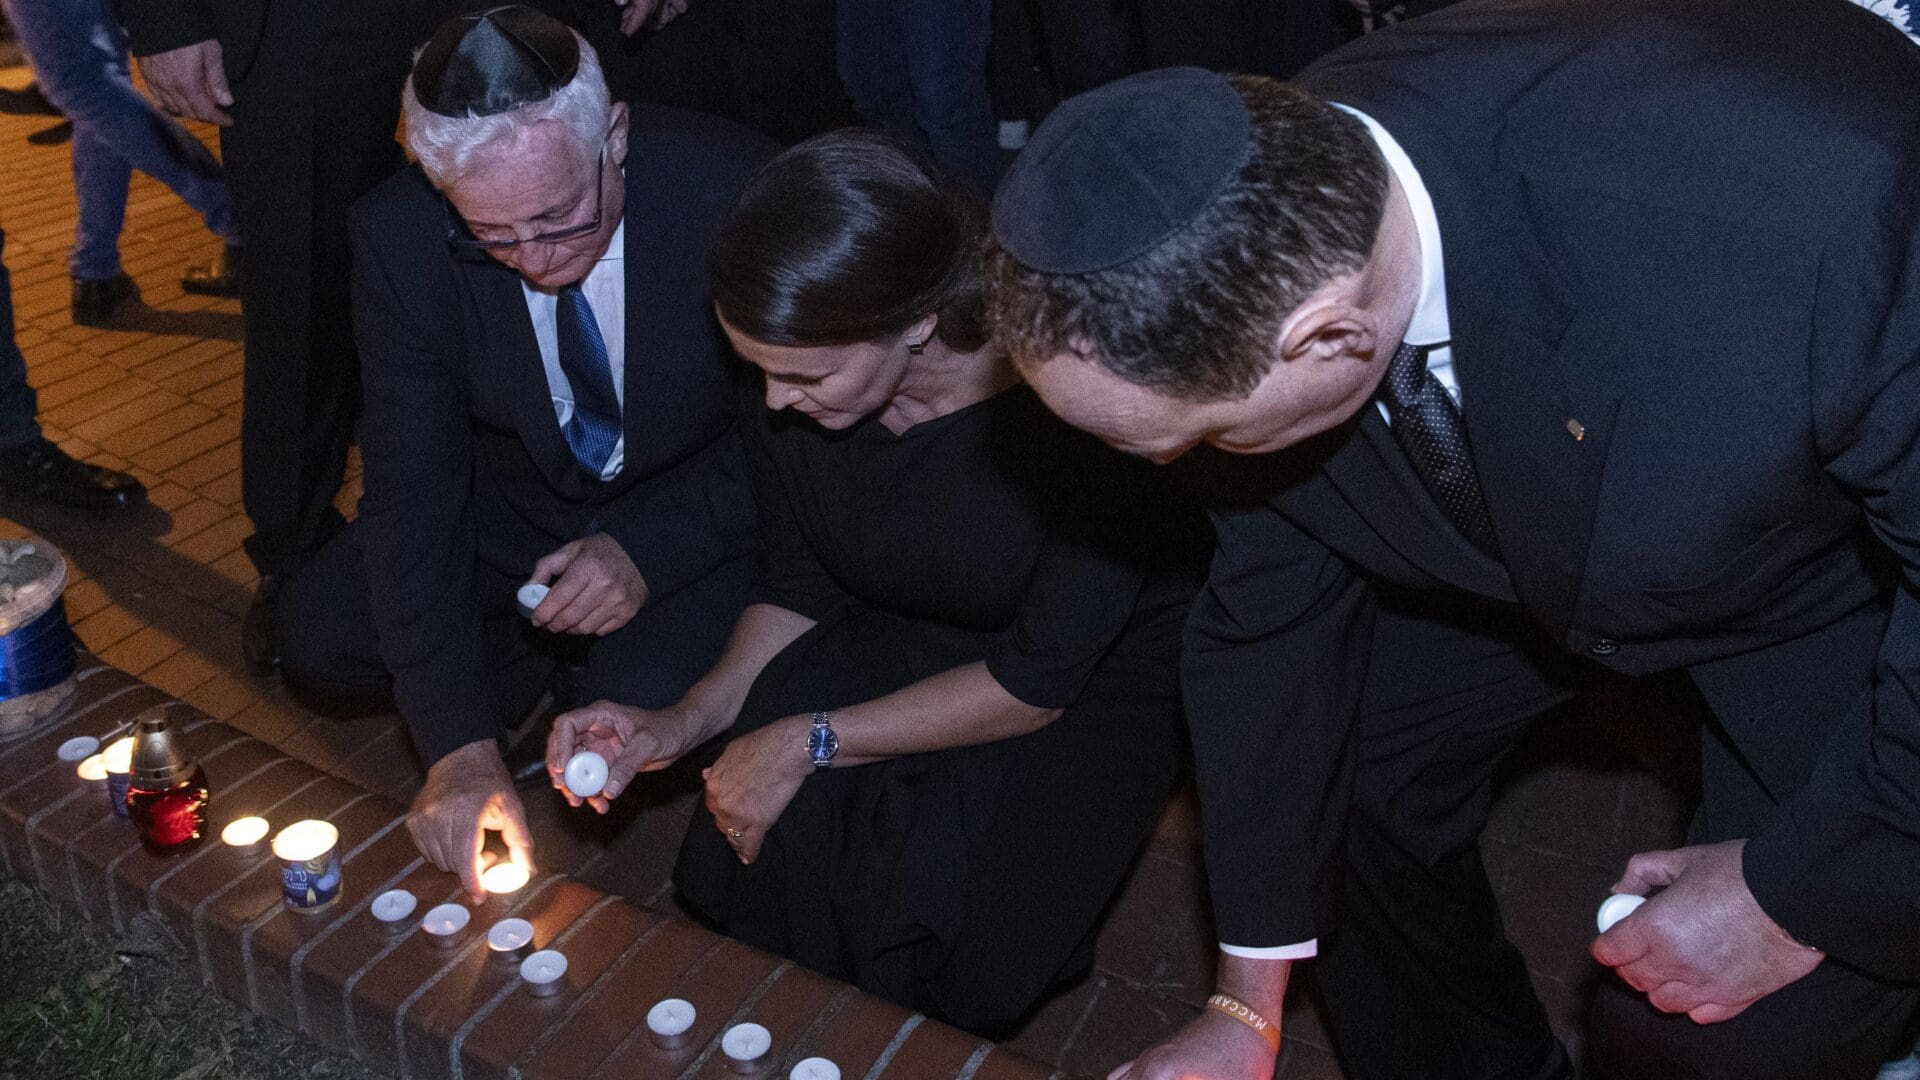 Katalin Novák, Andor Grósz (L) and President of the Budapest Jewish Religious Community Tamás Mester light candles in memory of the victims of the Hamas attack outside the Dohány Street synagogue on 11 October 2023.